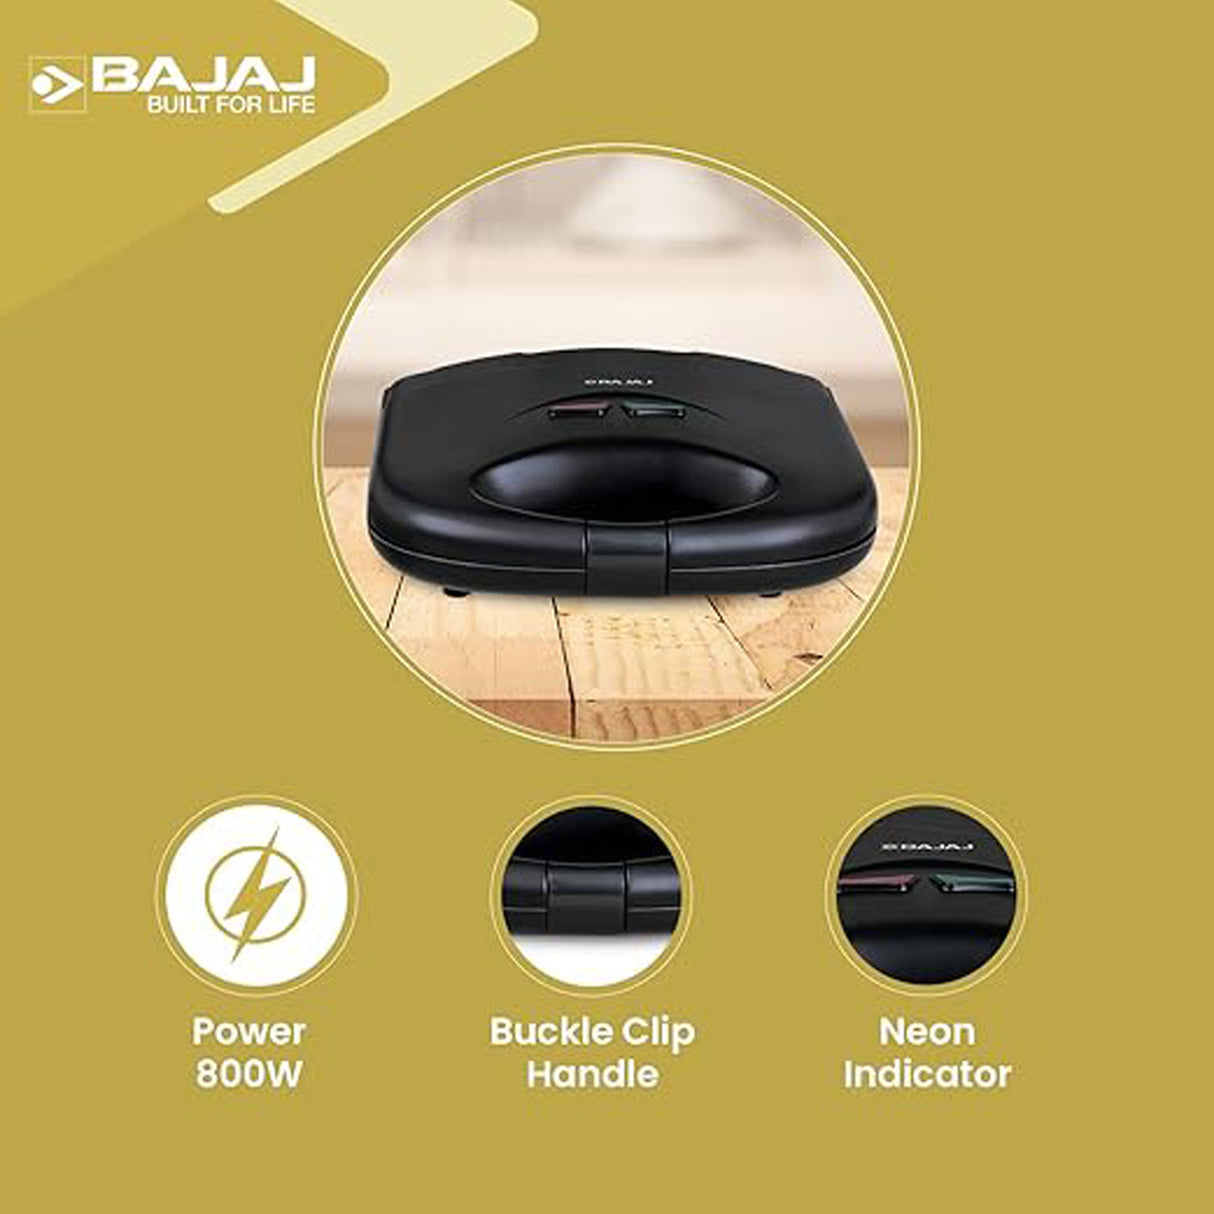 Gourmet paninis made effortlessly with Bajaj SWX 4 Deluxe Toast Maker.